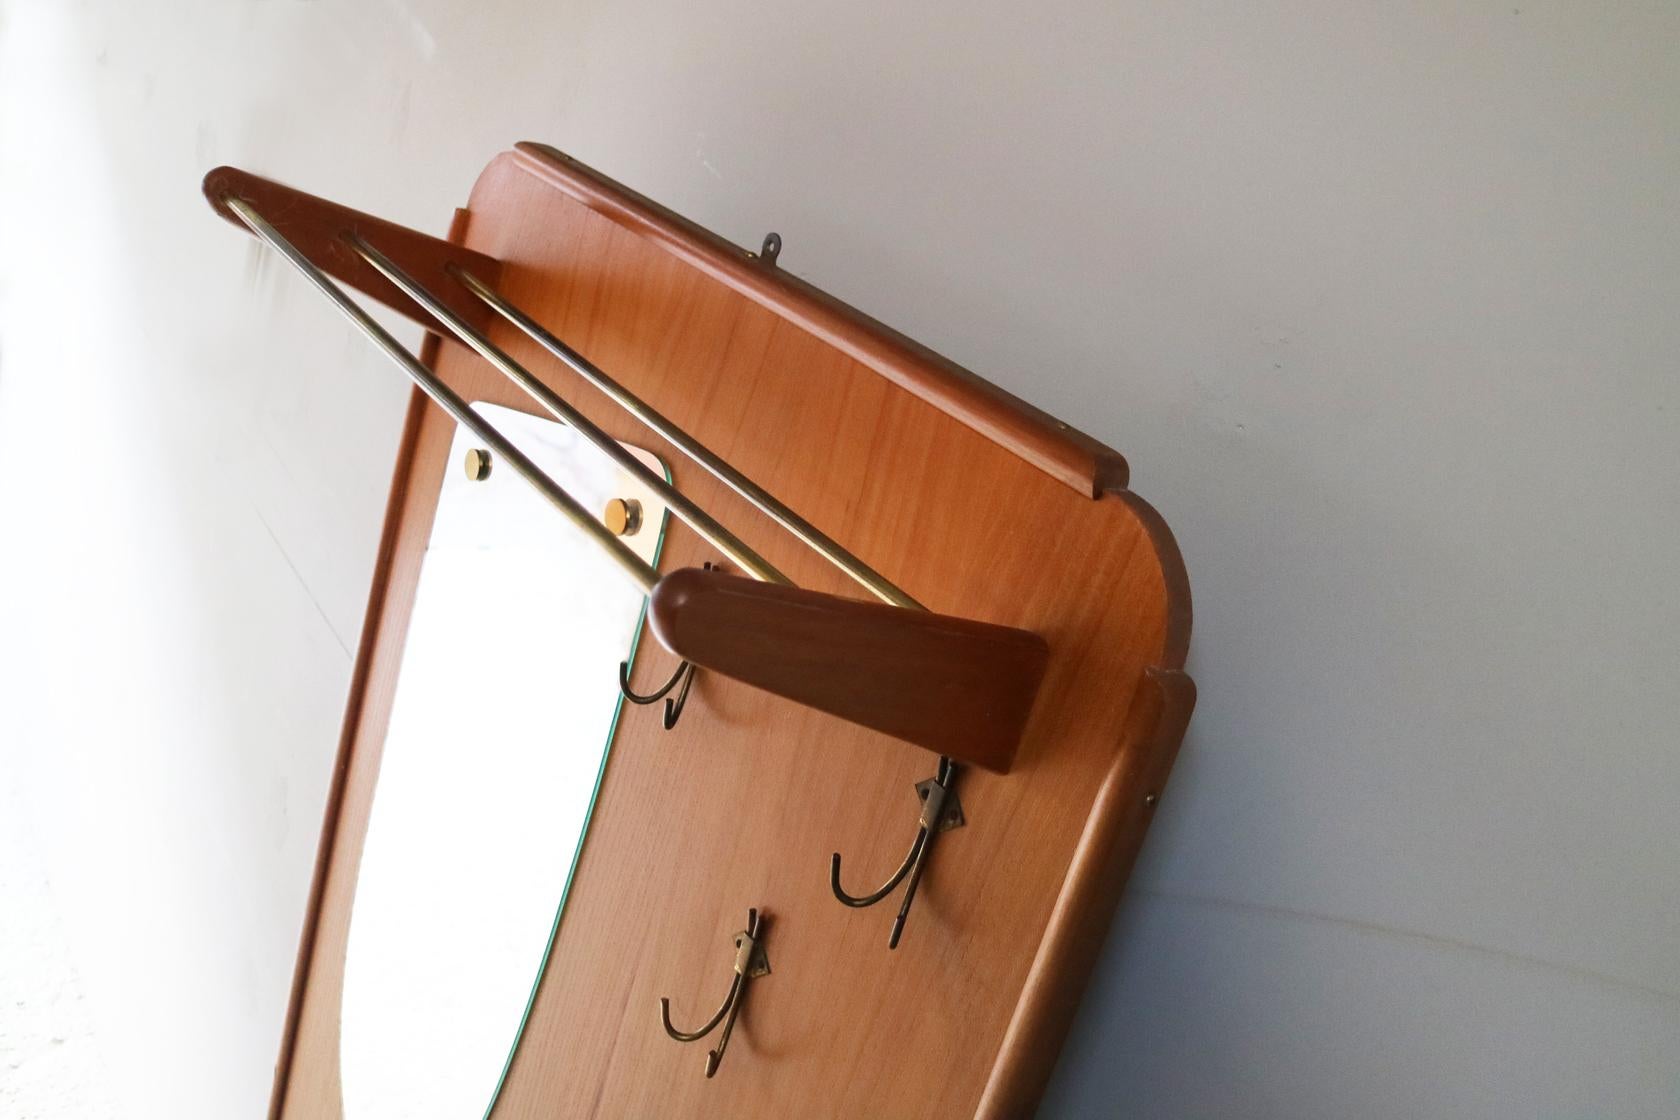 Free standing ‘hall stand’ with:
- Top hat rack
- Mirror
- Coat hooks
- Storage cupboard and drawer
- Umbrella stand.

Can be free standing or hung on the wall using eyelet. Lovely teak finish throughout. Petite brass handles.
 